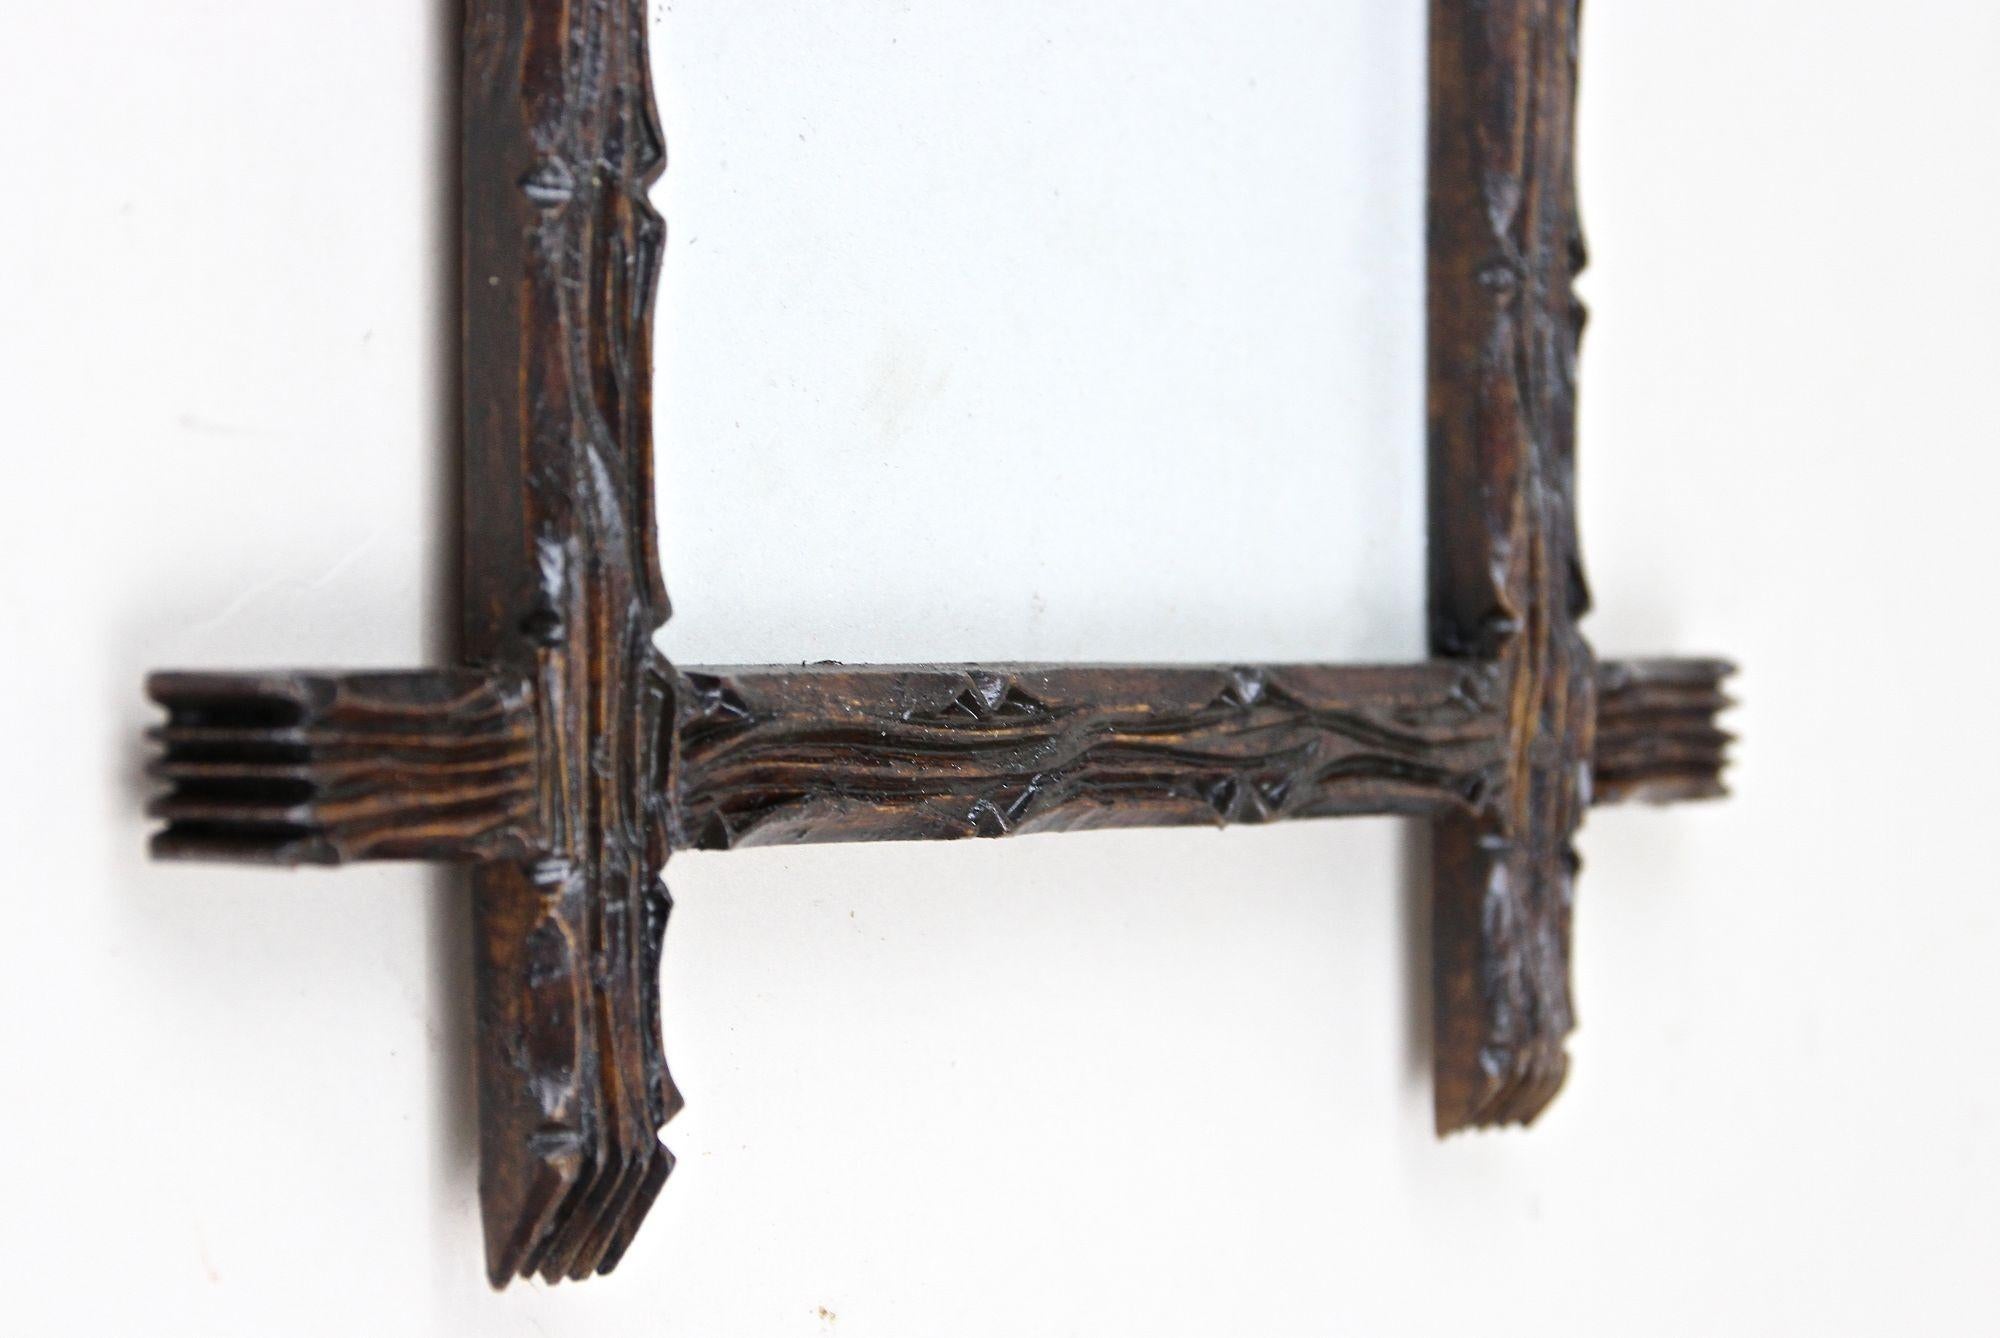 19th Century Rustic Wooden Photo Frame, Black Forest Style - Handcarved, Austria circa 1860